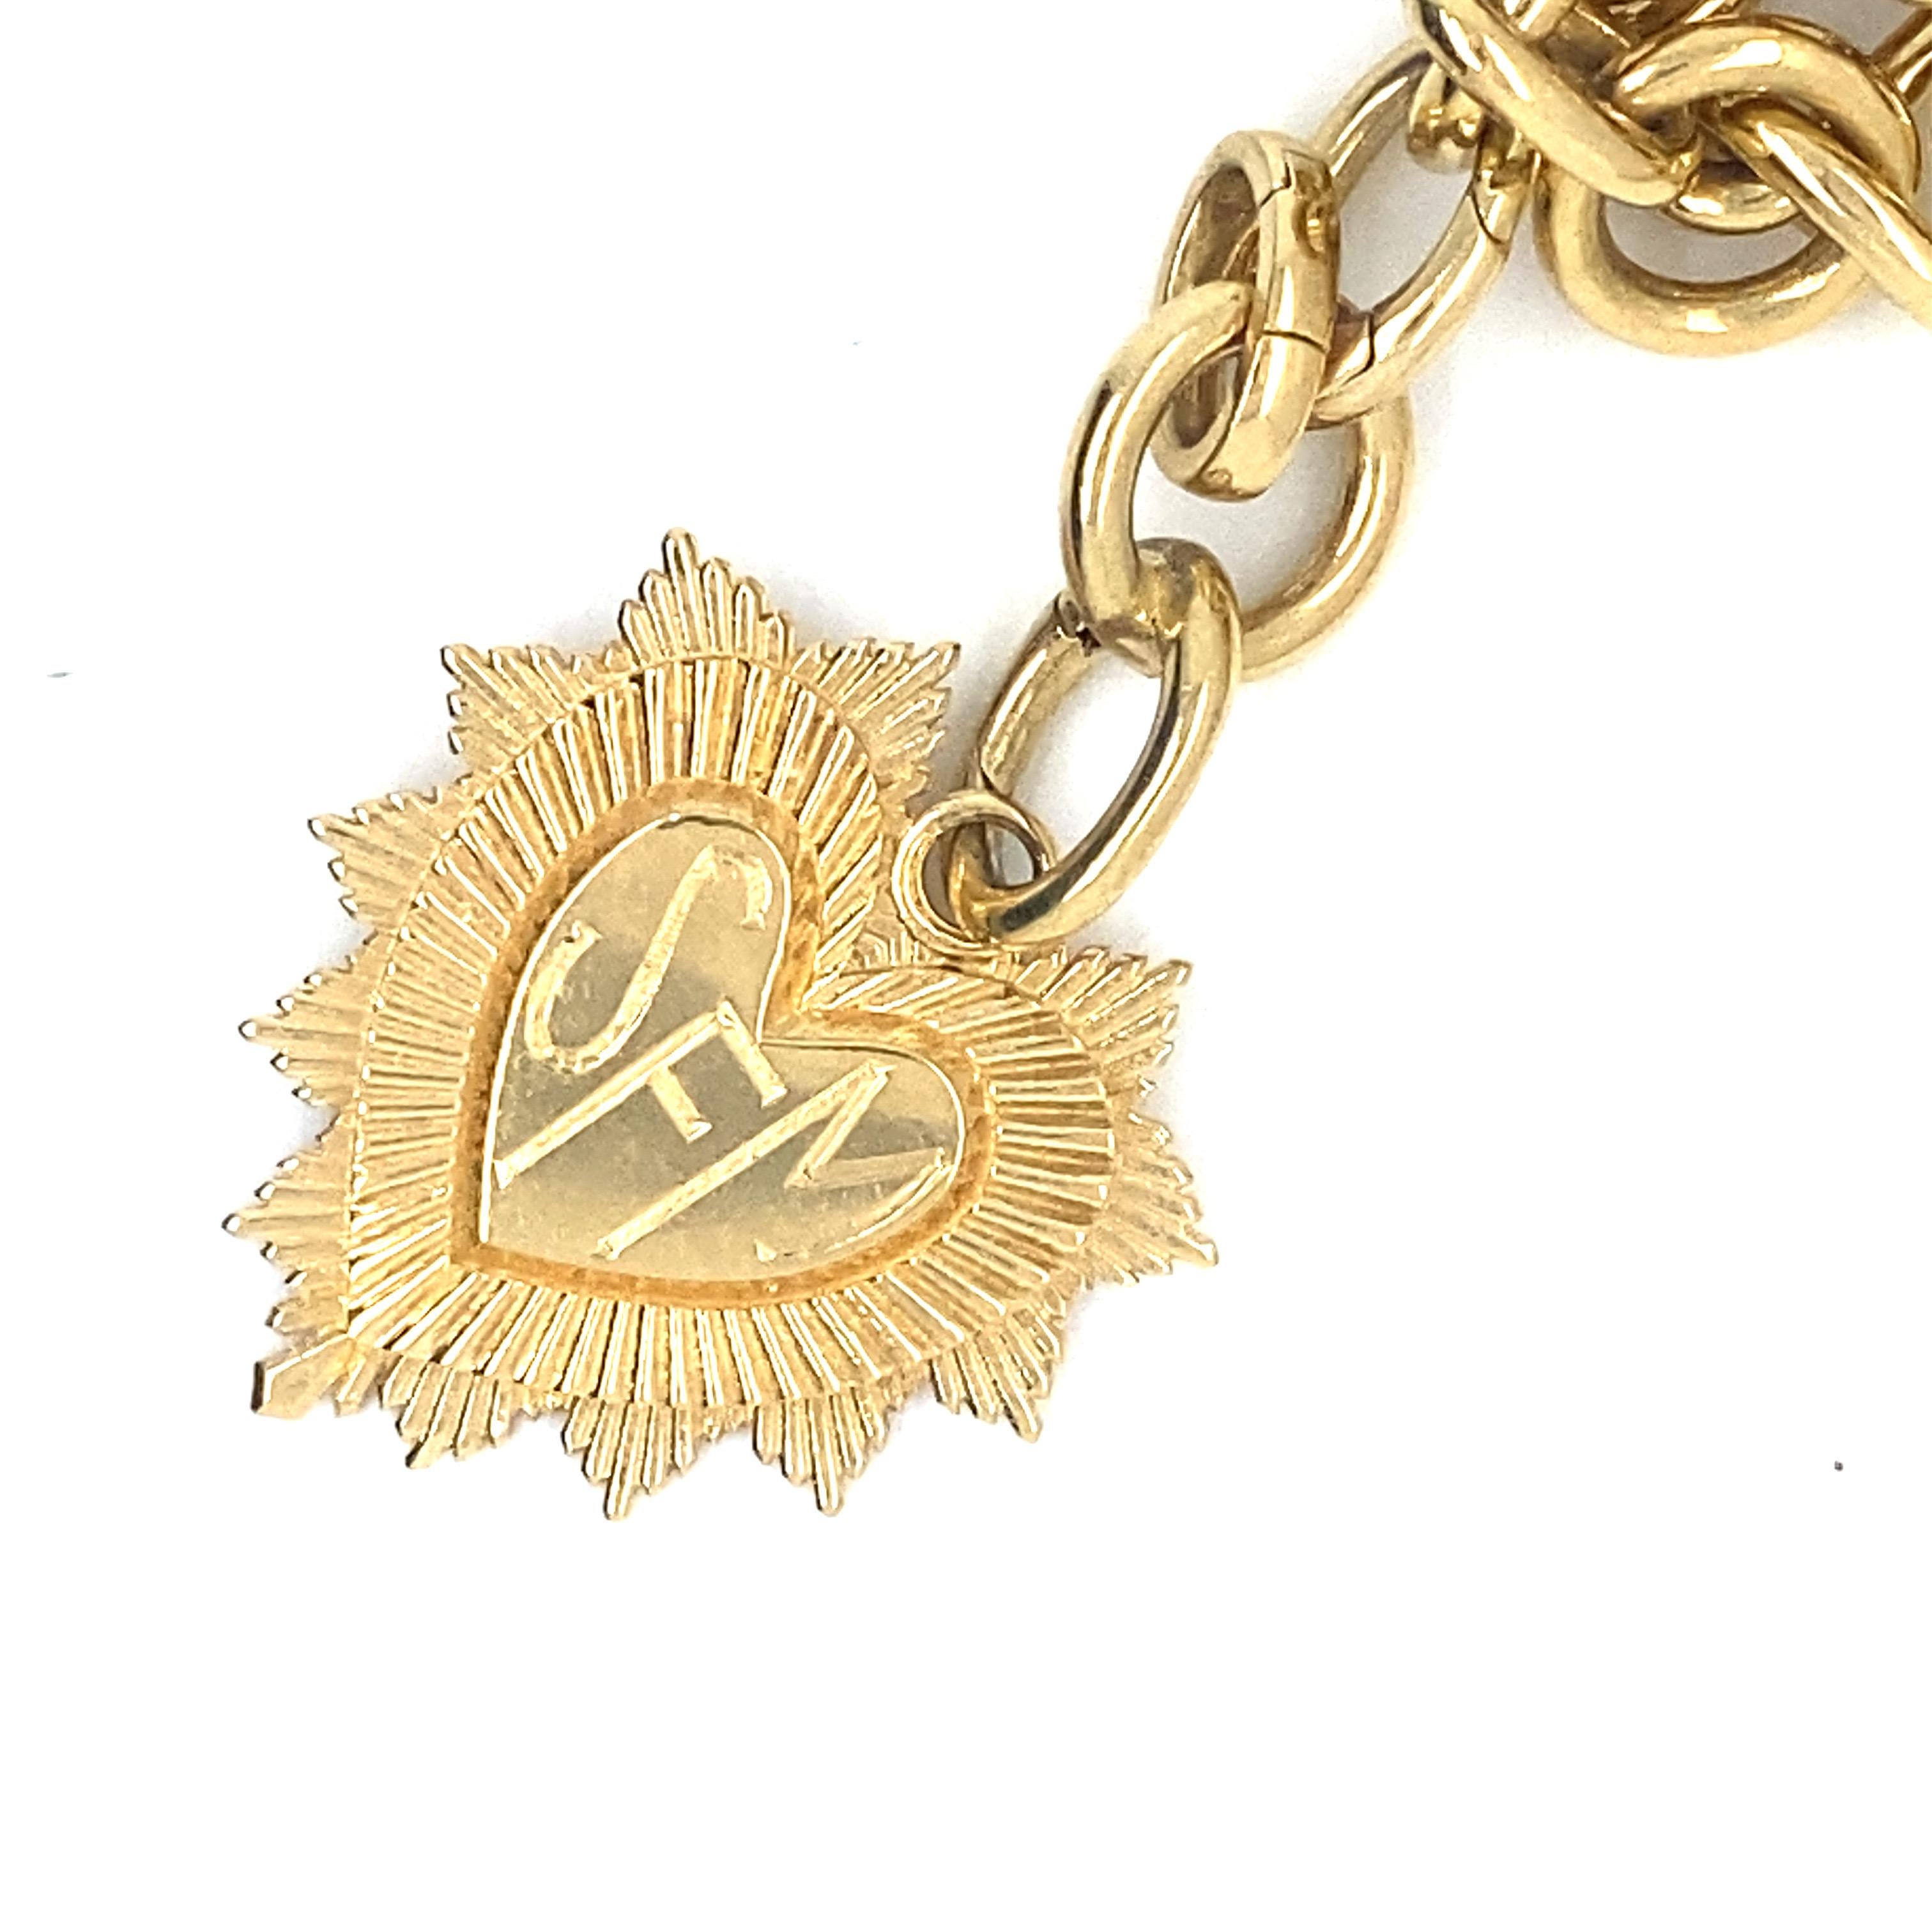 Foundrae Heart Shape Charm in 18K Yellow Gold.   The Charm measures 1 inch in length and 15/16 inch in width.  5.44 grams.  Signed. Charm only. Necklace not included. Retails for $2595